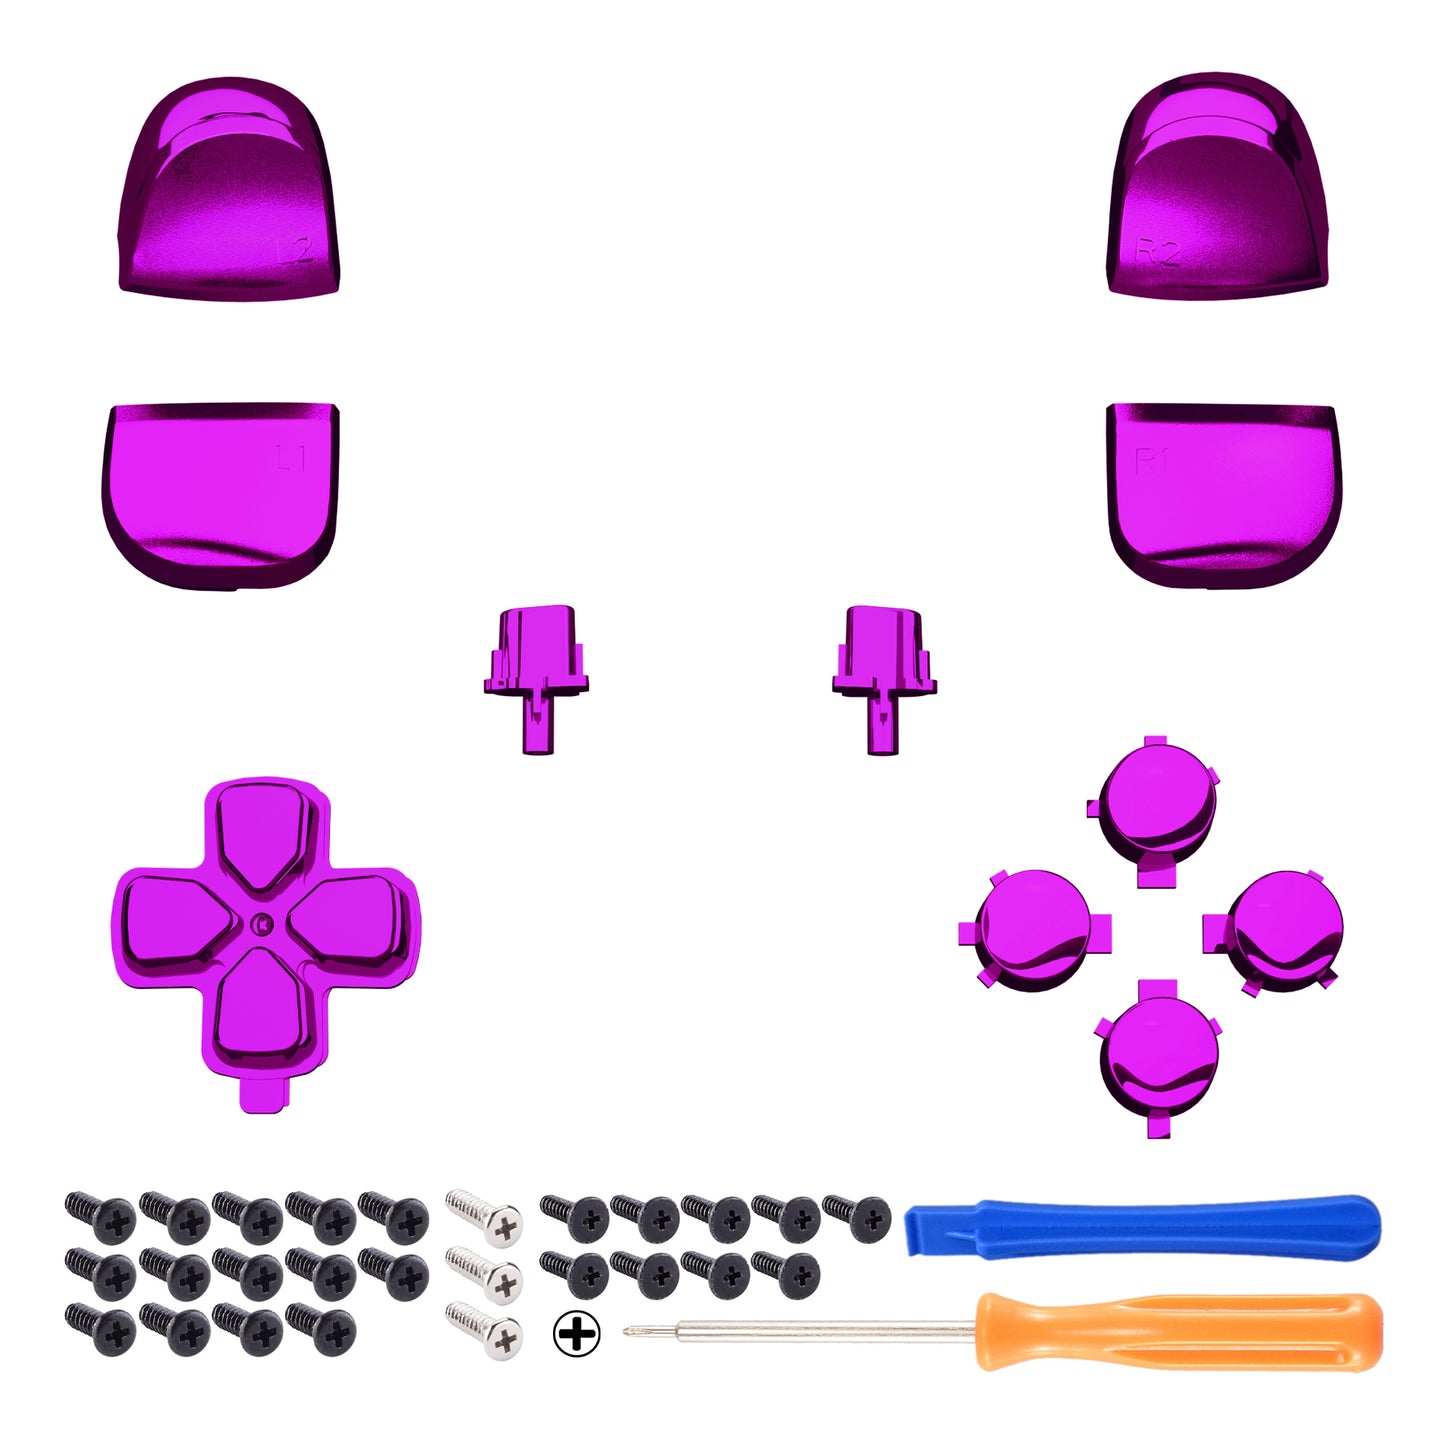 eXtremeRate Retail Replacement D-pad R1 L1 R2 L2 Triggers Share Options Face Buttons, Chrome Purple Full Set Buttons Compatible With ps5 Controller BDM-010 & BDM-020 - JPF2005G2